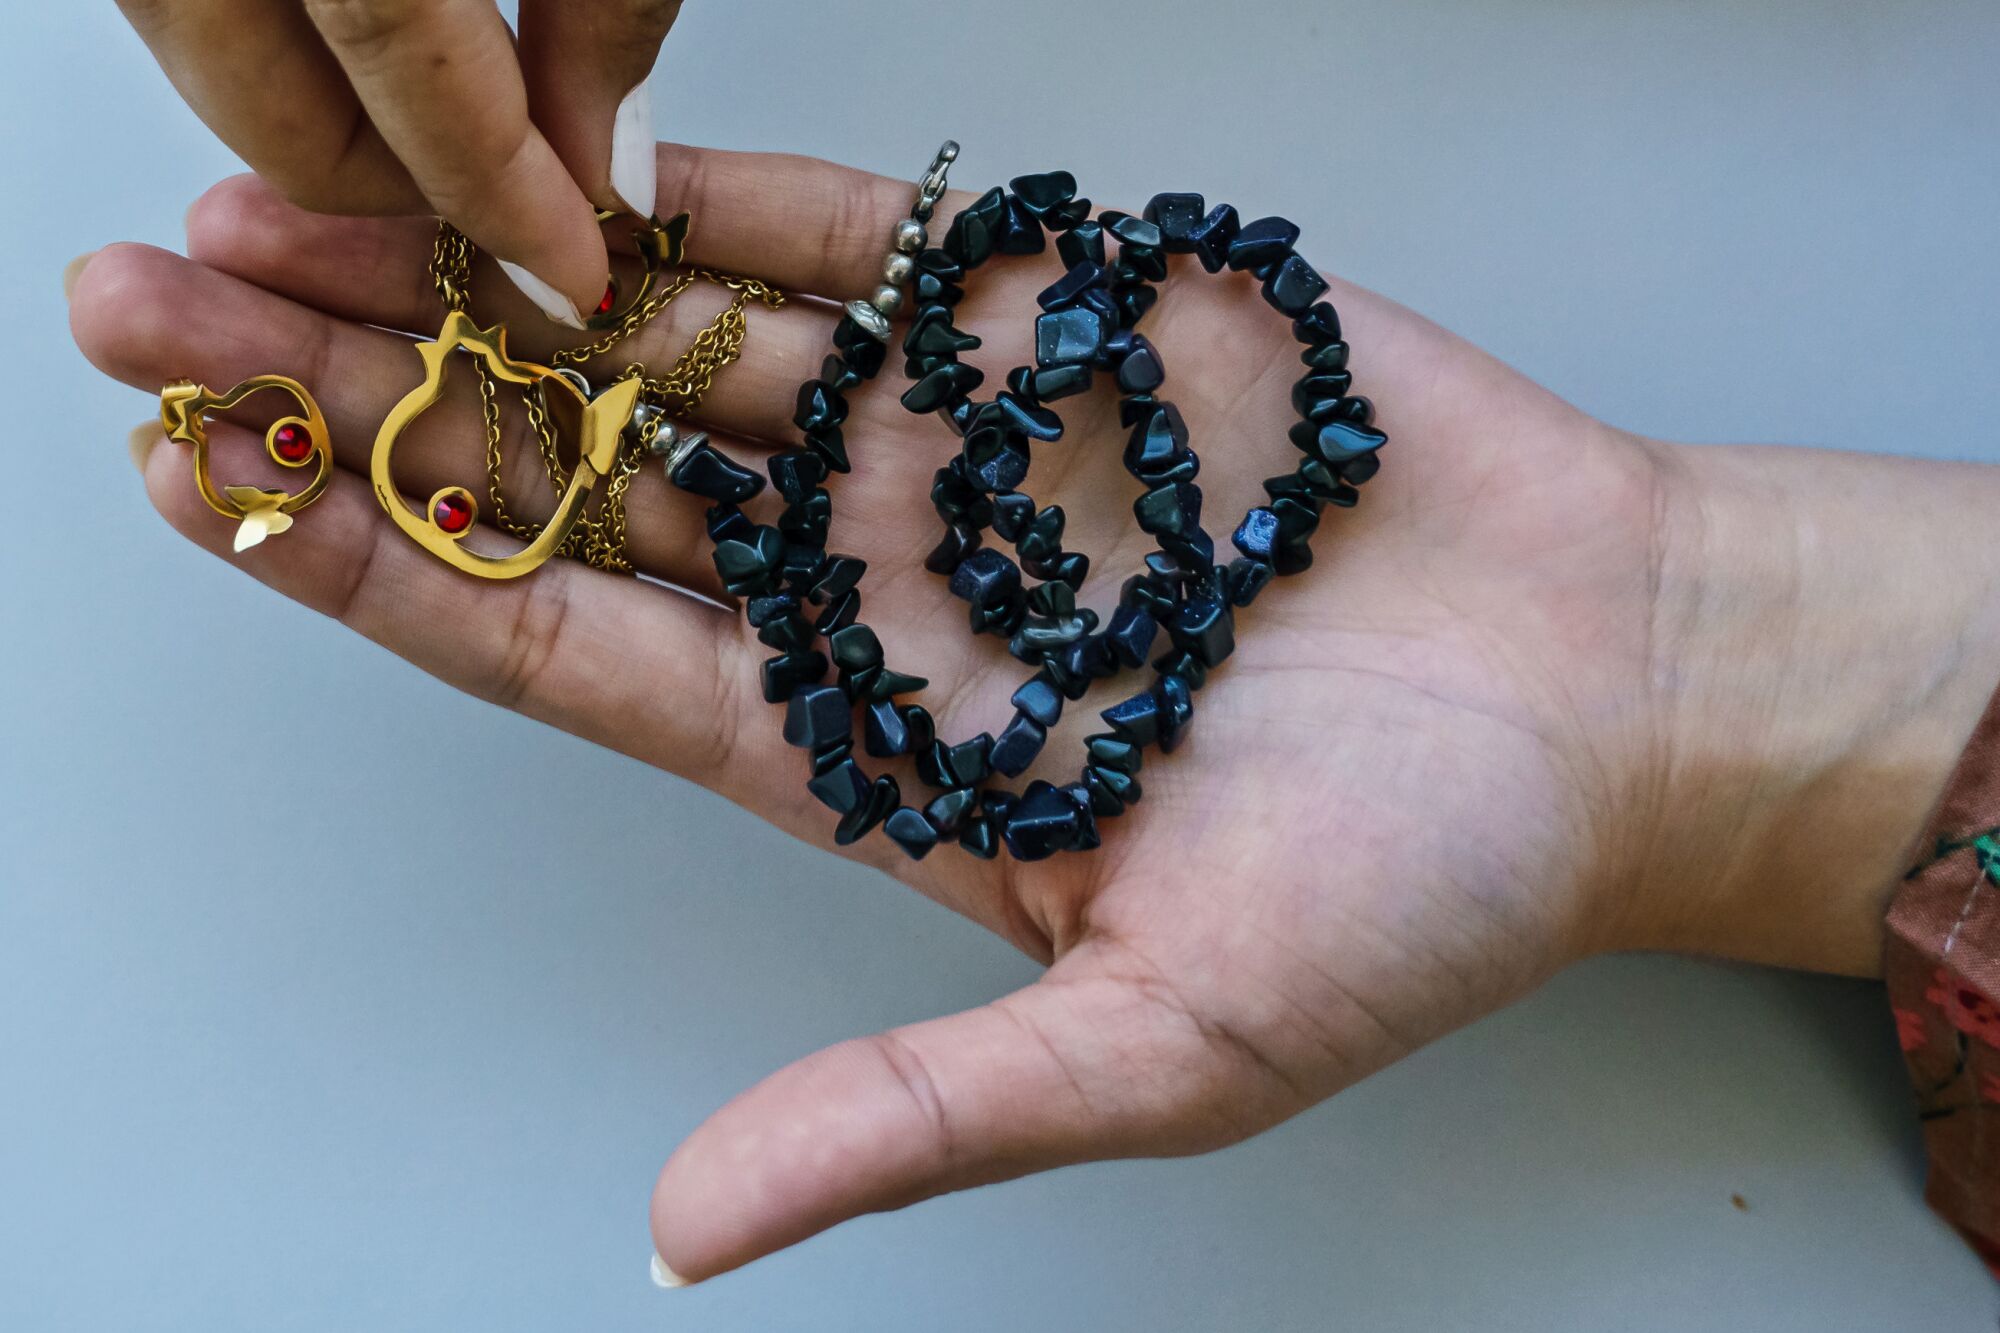 A black stone necklace held in a hand